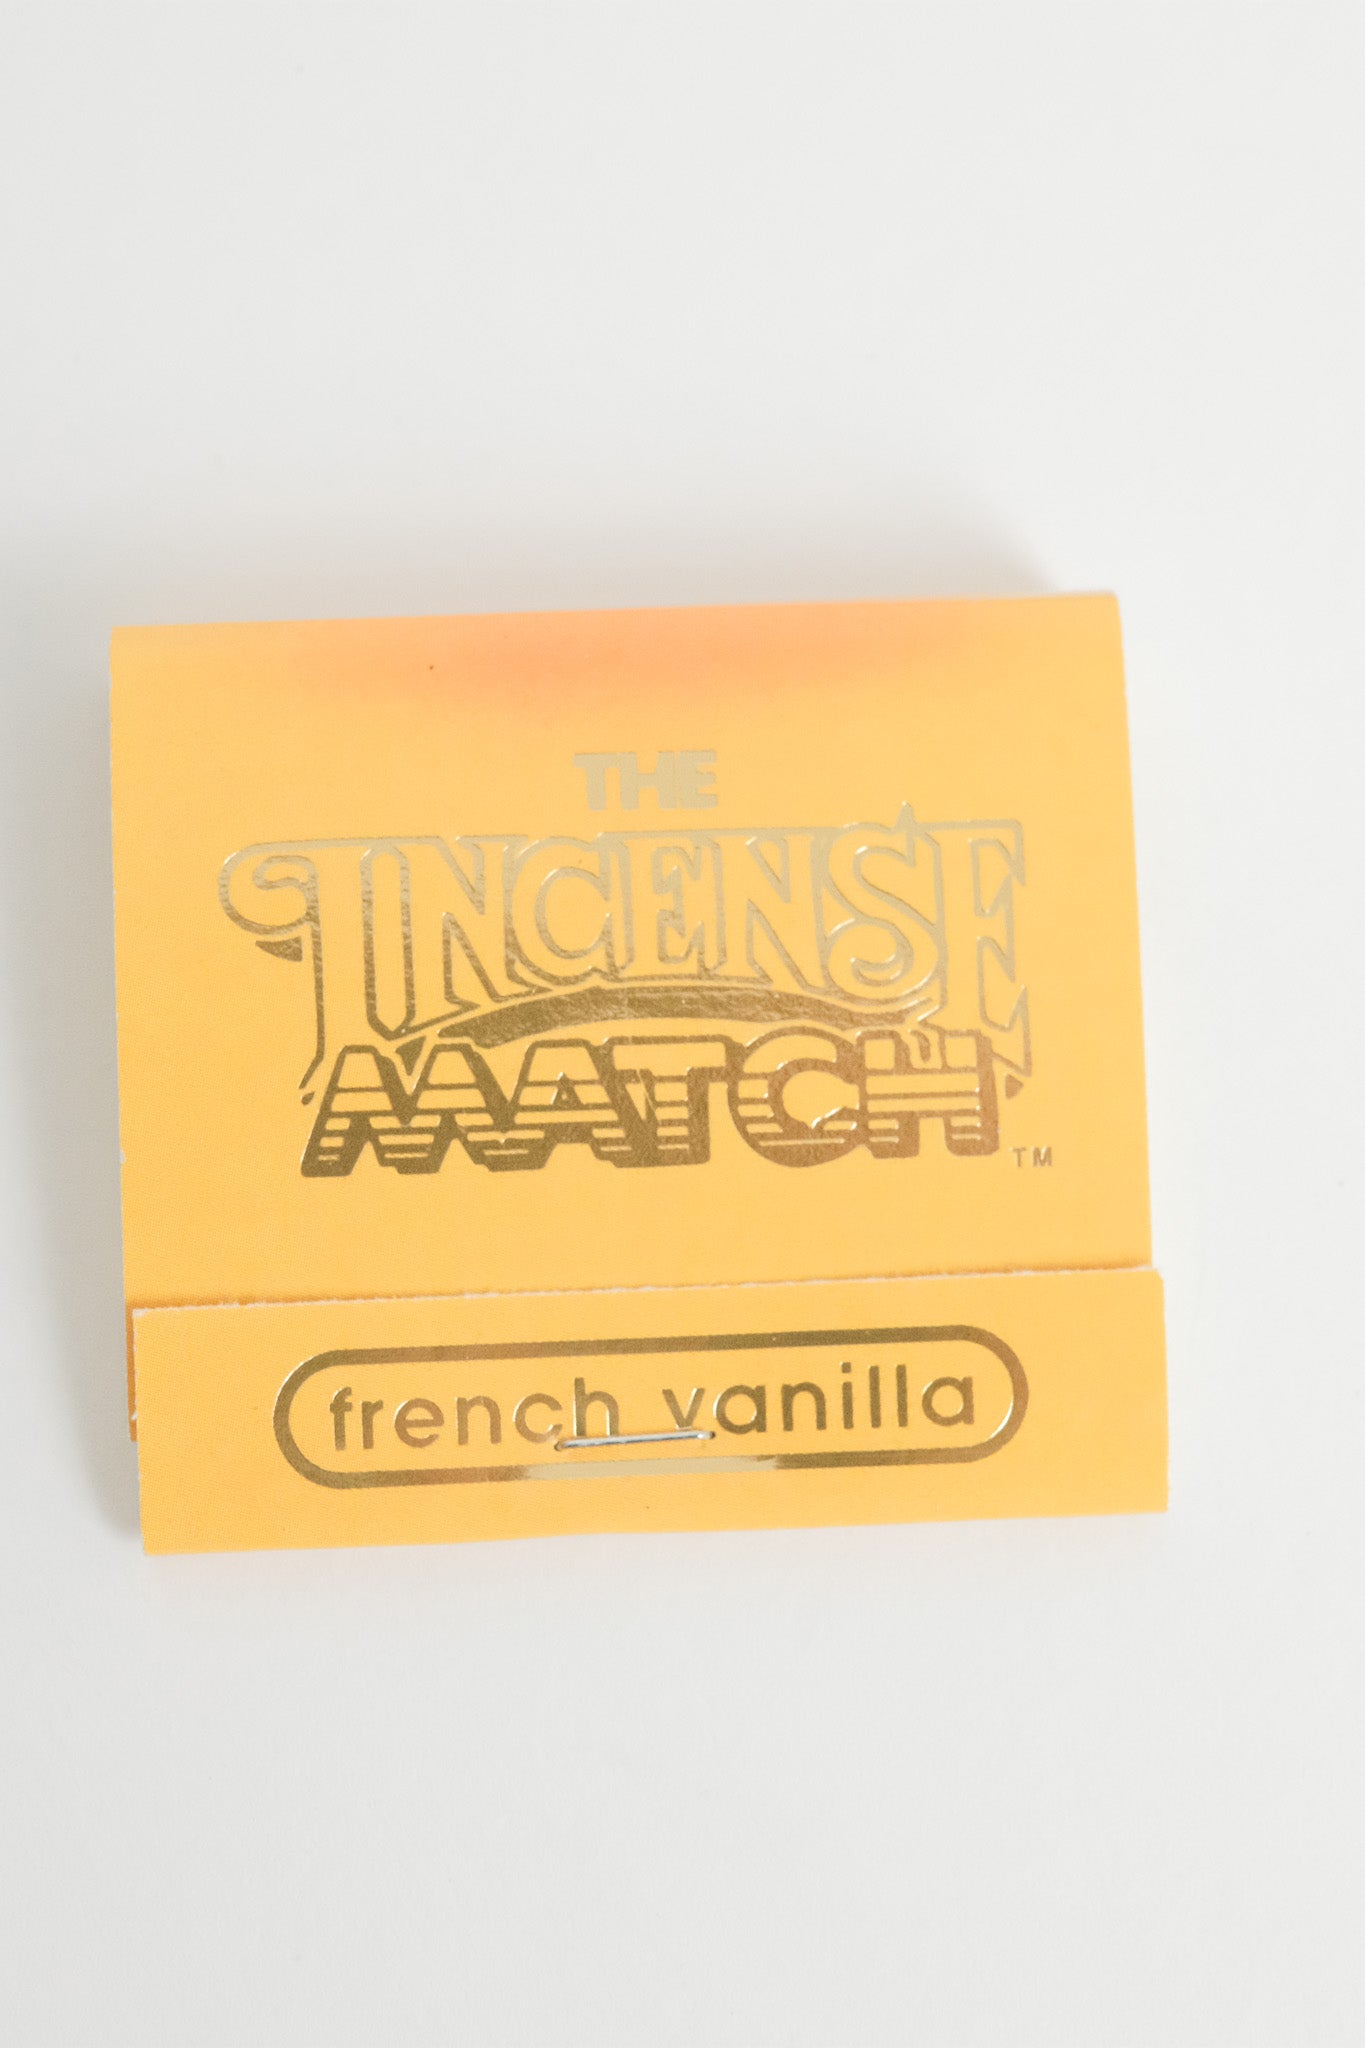 Incense Matches - Assorted